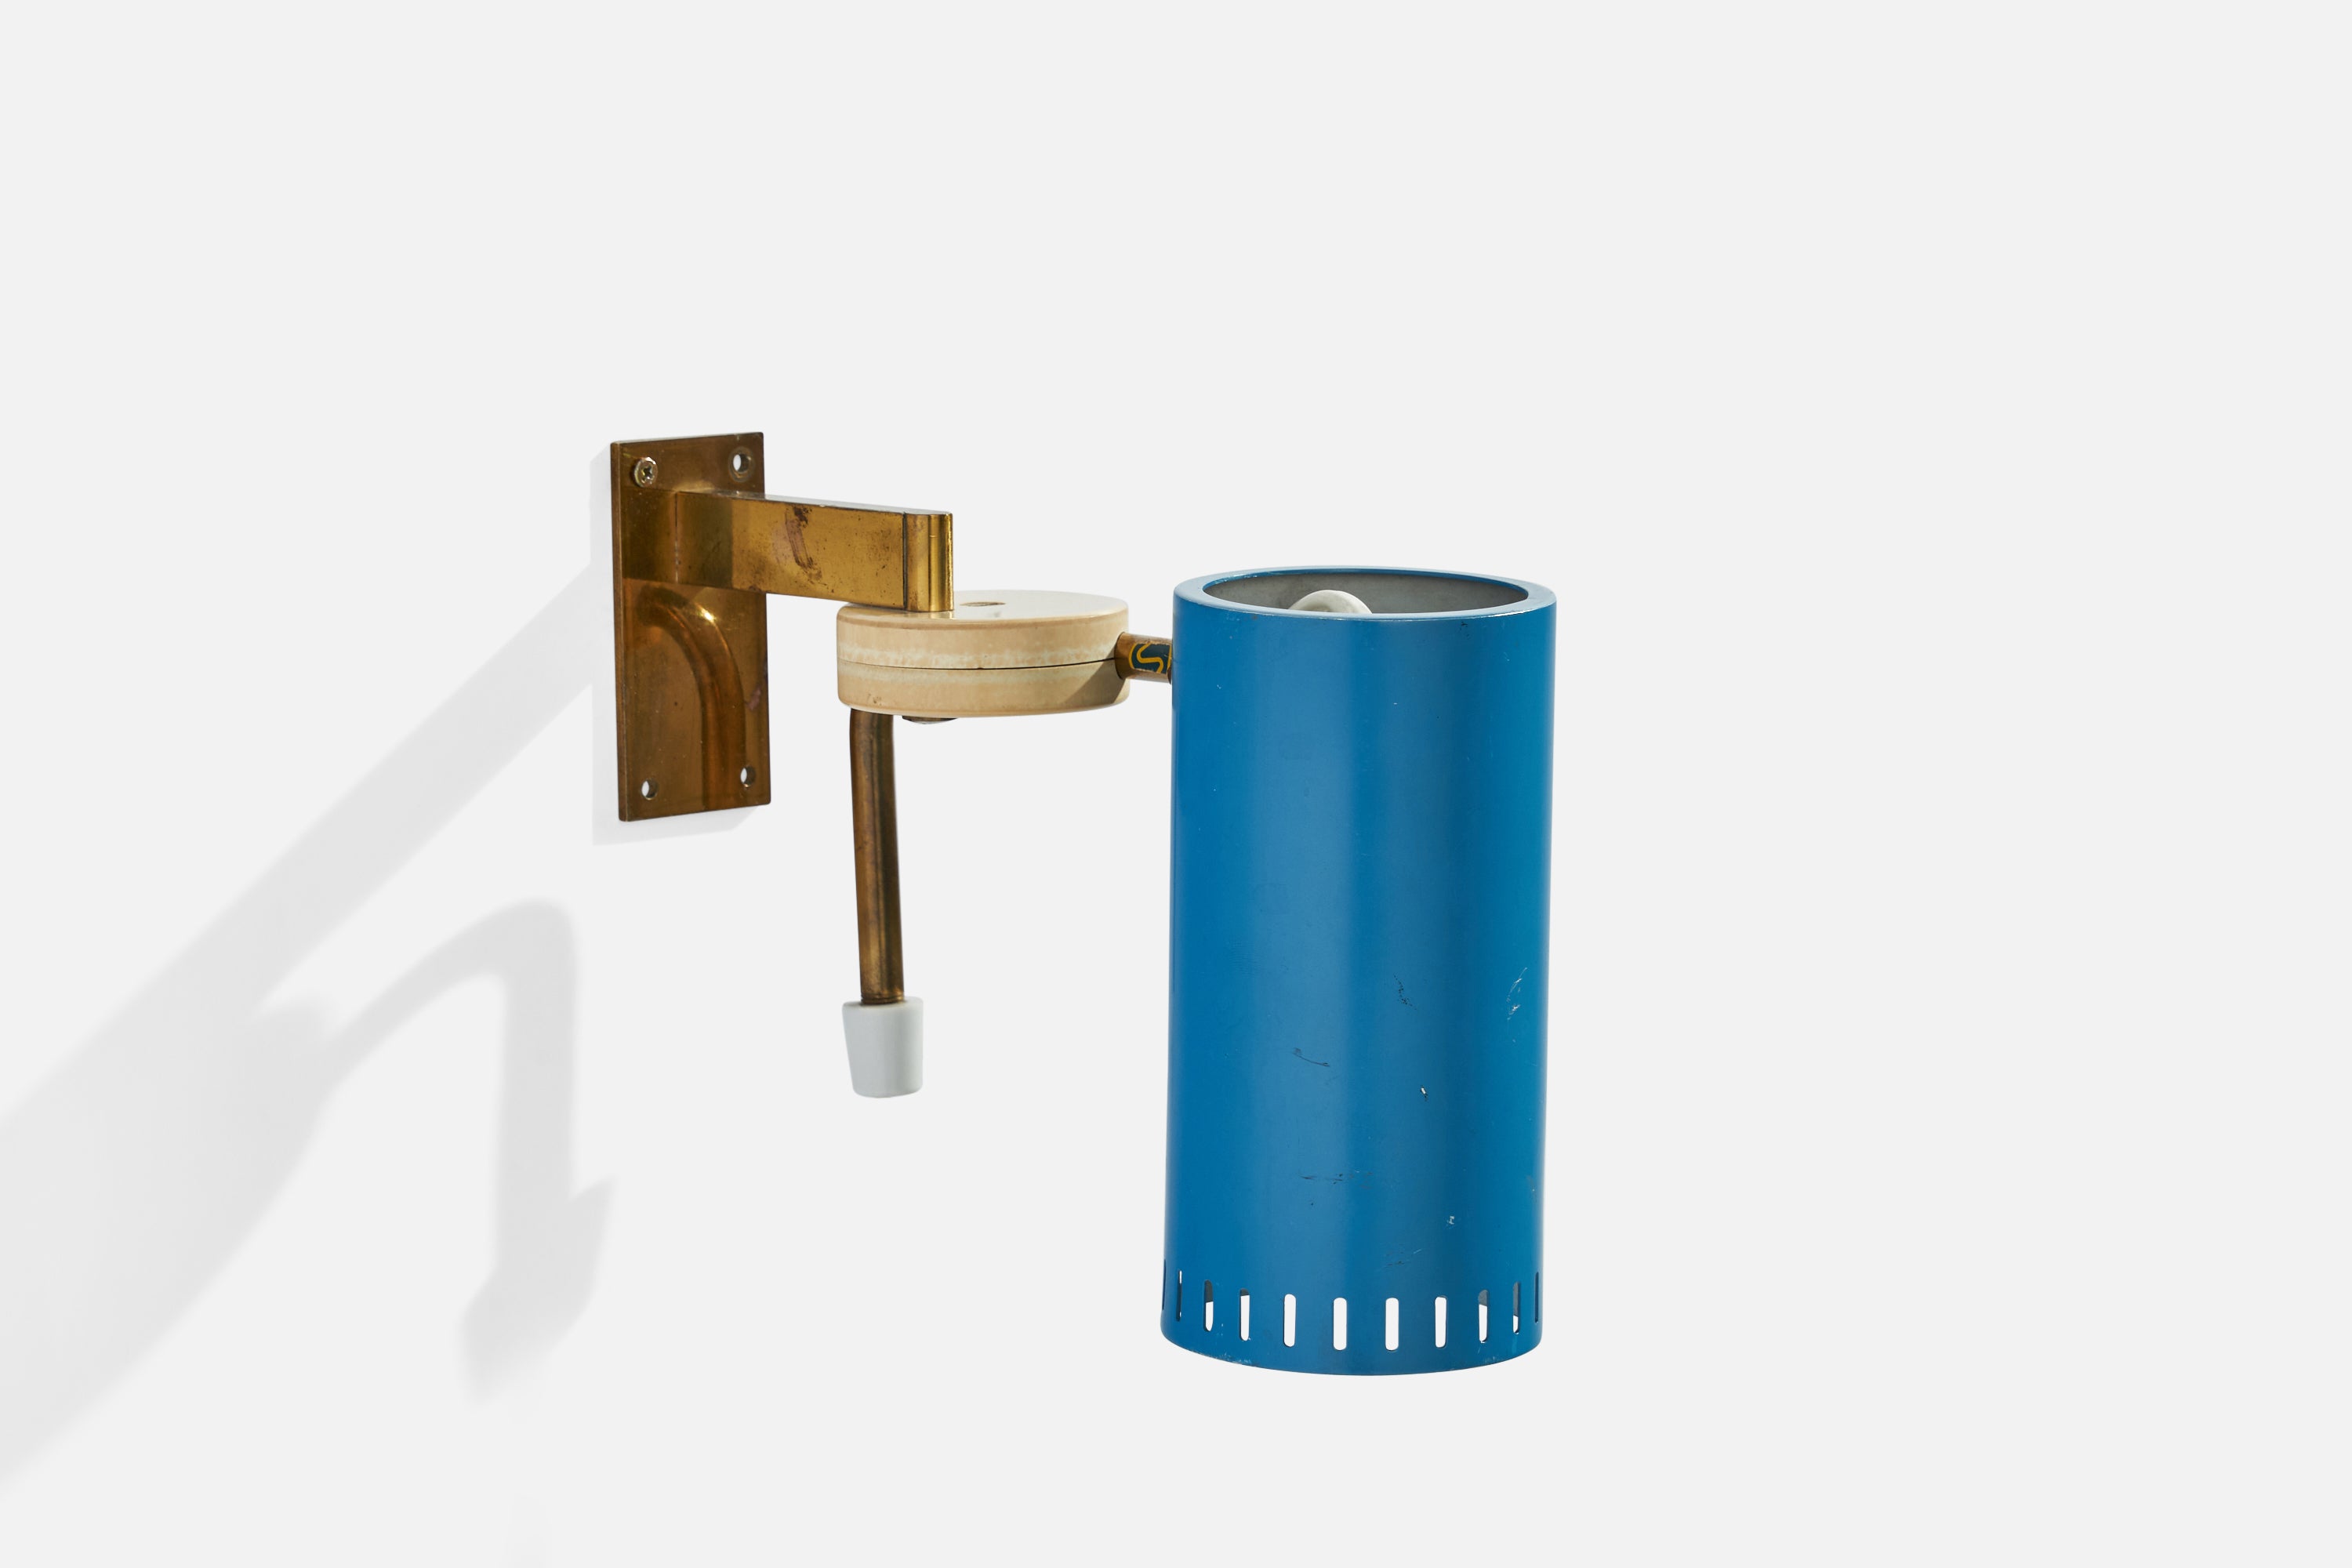 A brass, plastic, and blue-lacquered metal wall light designed and produced in Sweden, 1950s.

Functions via plug-in with cord feeding from bottom of brass stem.

Overall Dimensions (inches): 7”  H x 3” W x 8.5”  D
Back Plate Dimensions (inches):